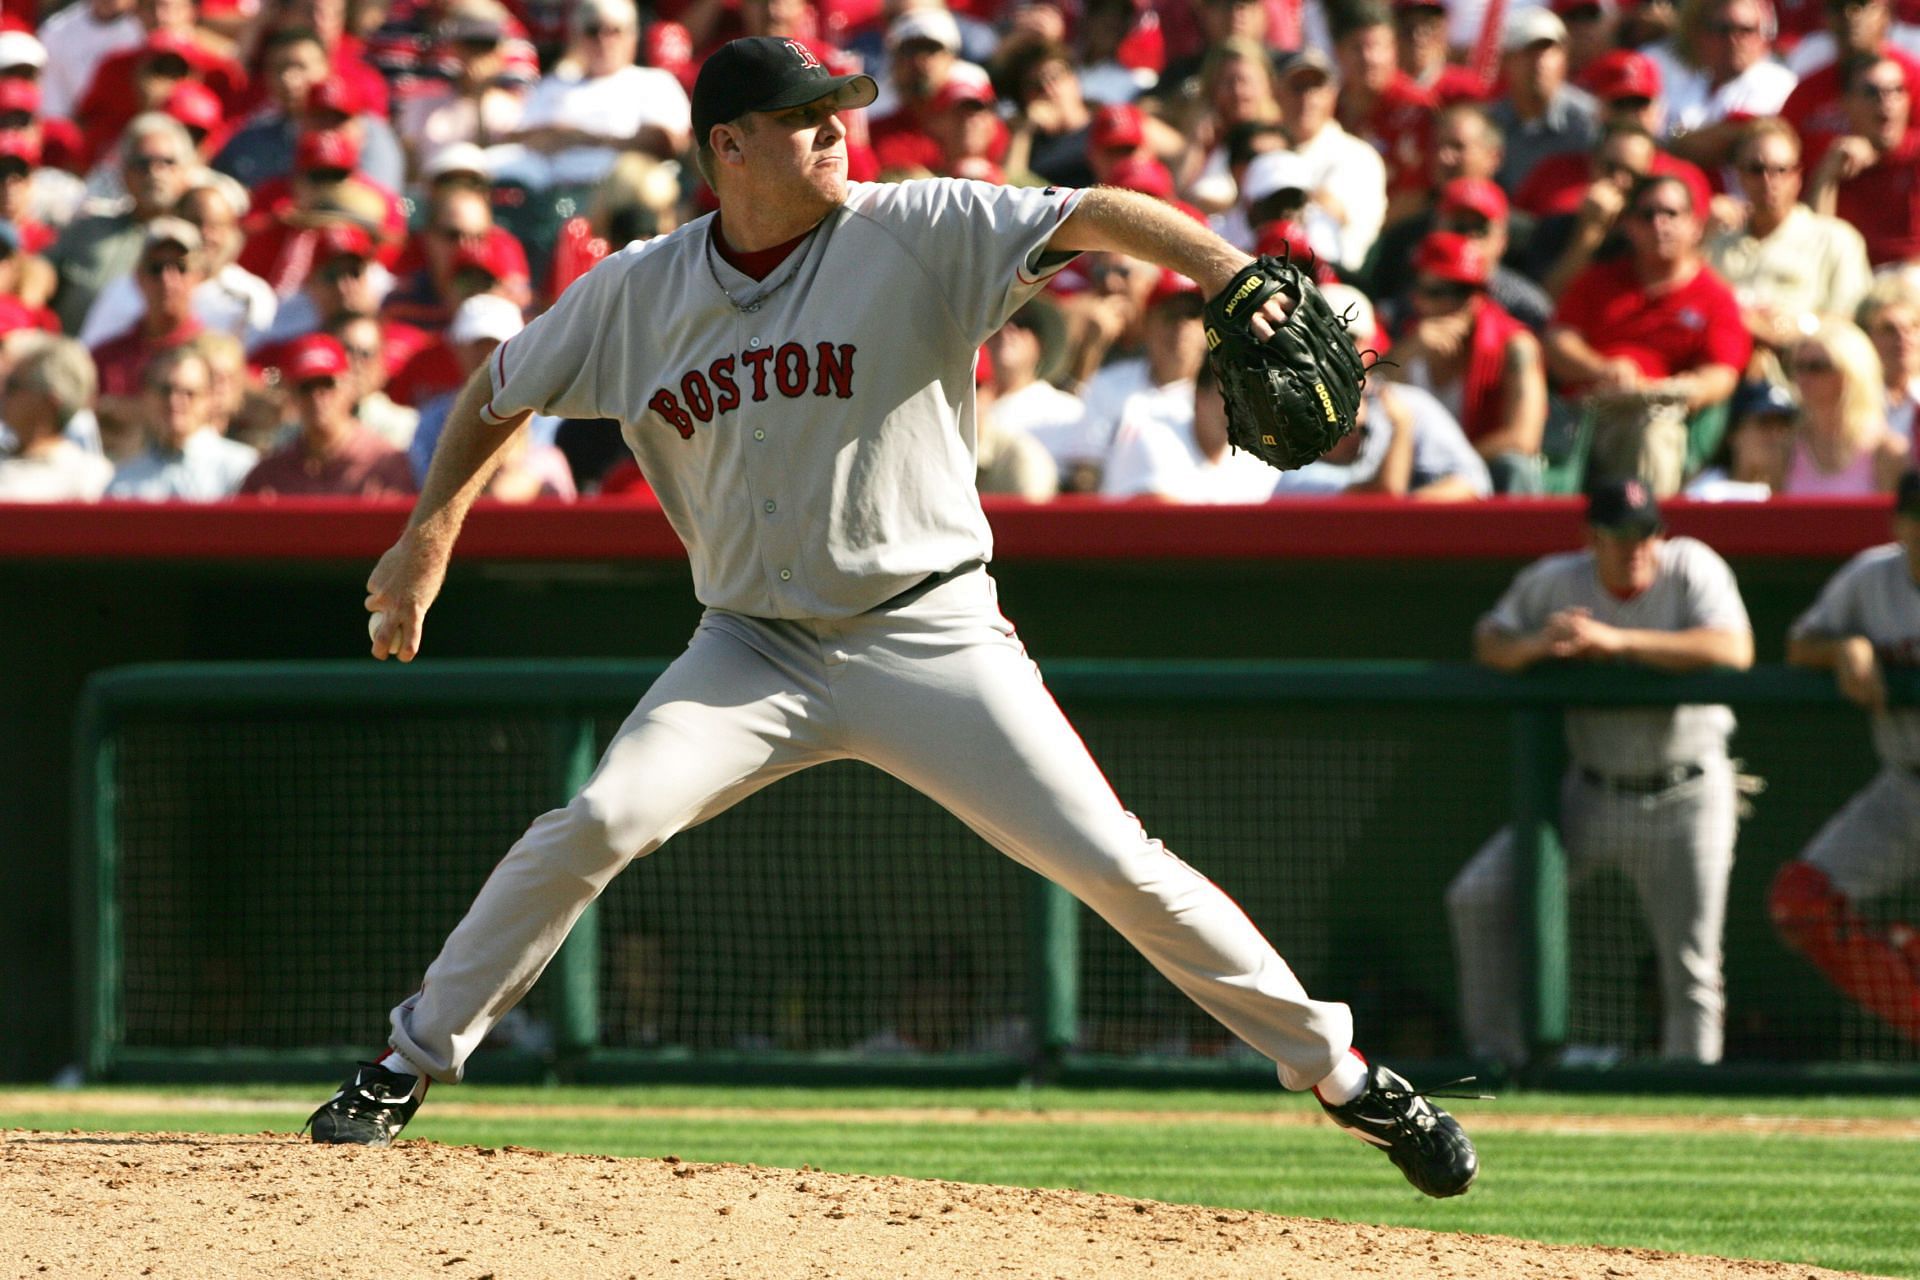 Pitcher Curt Schilling of the Boston Red Sox (Photo by Stephen Dunn/Getty Images)